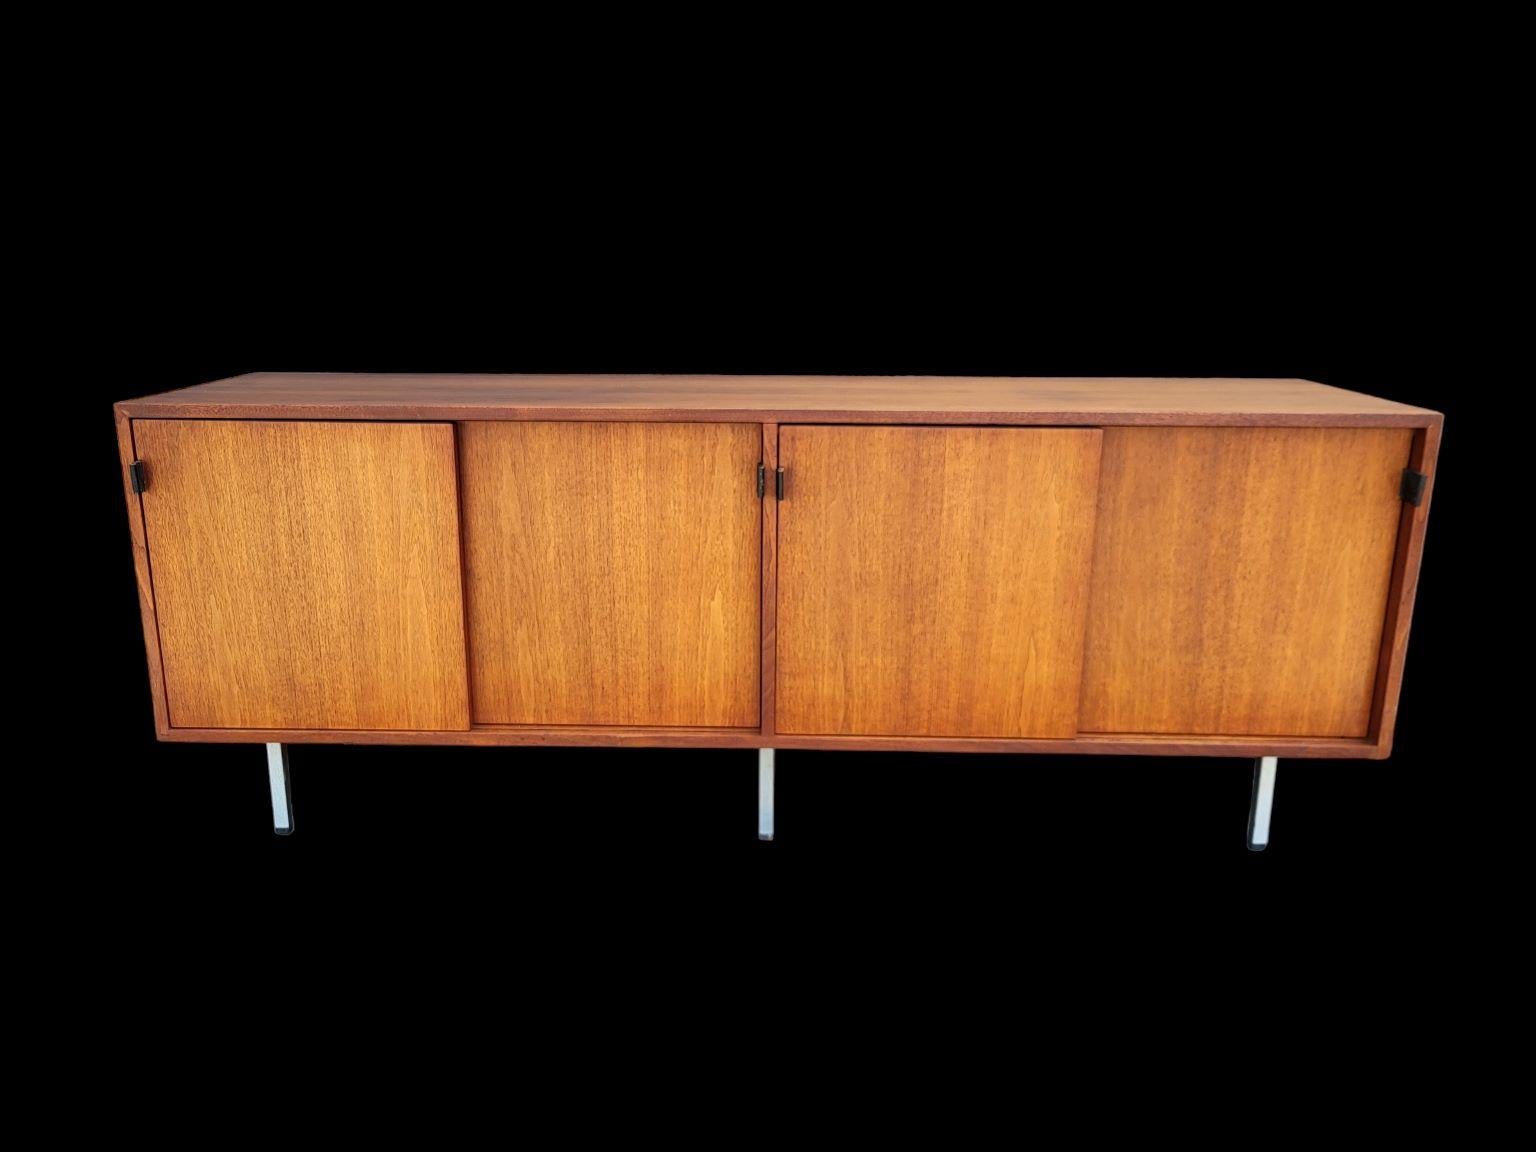 Mid Century Florence Knoll Credenza in walnut veneer case with light oak interior and black leather handles on chrome legs, marked 1963. Beautiful original condition, some wear on the leather handles, as noted in photo. Has original Knoll tag on